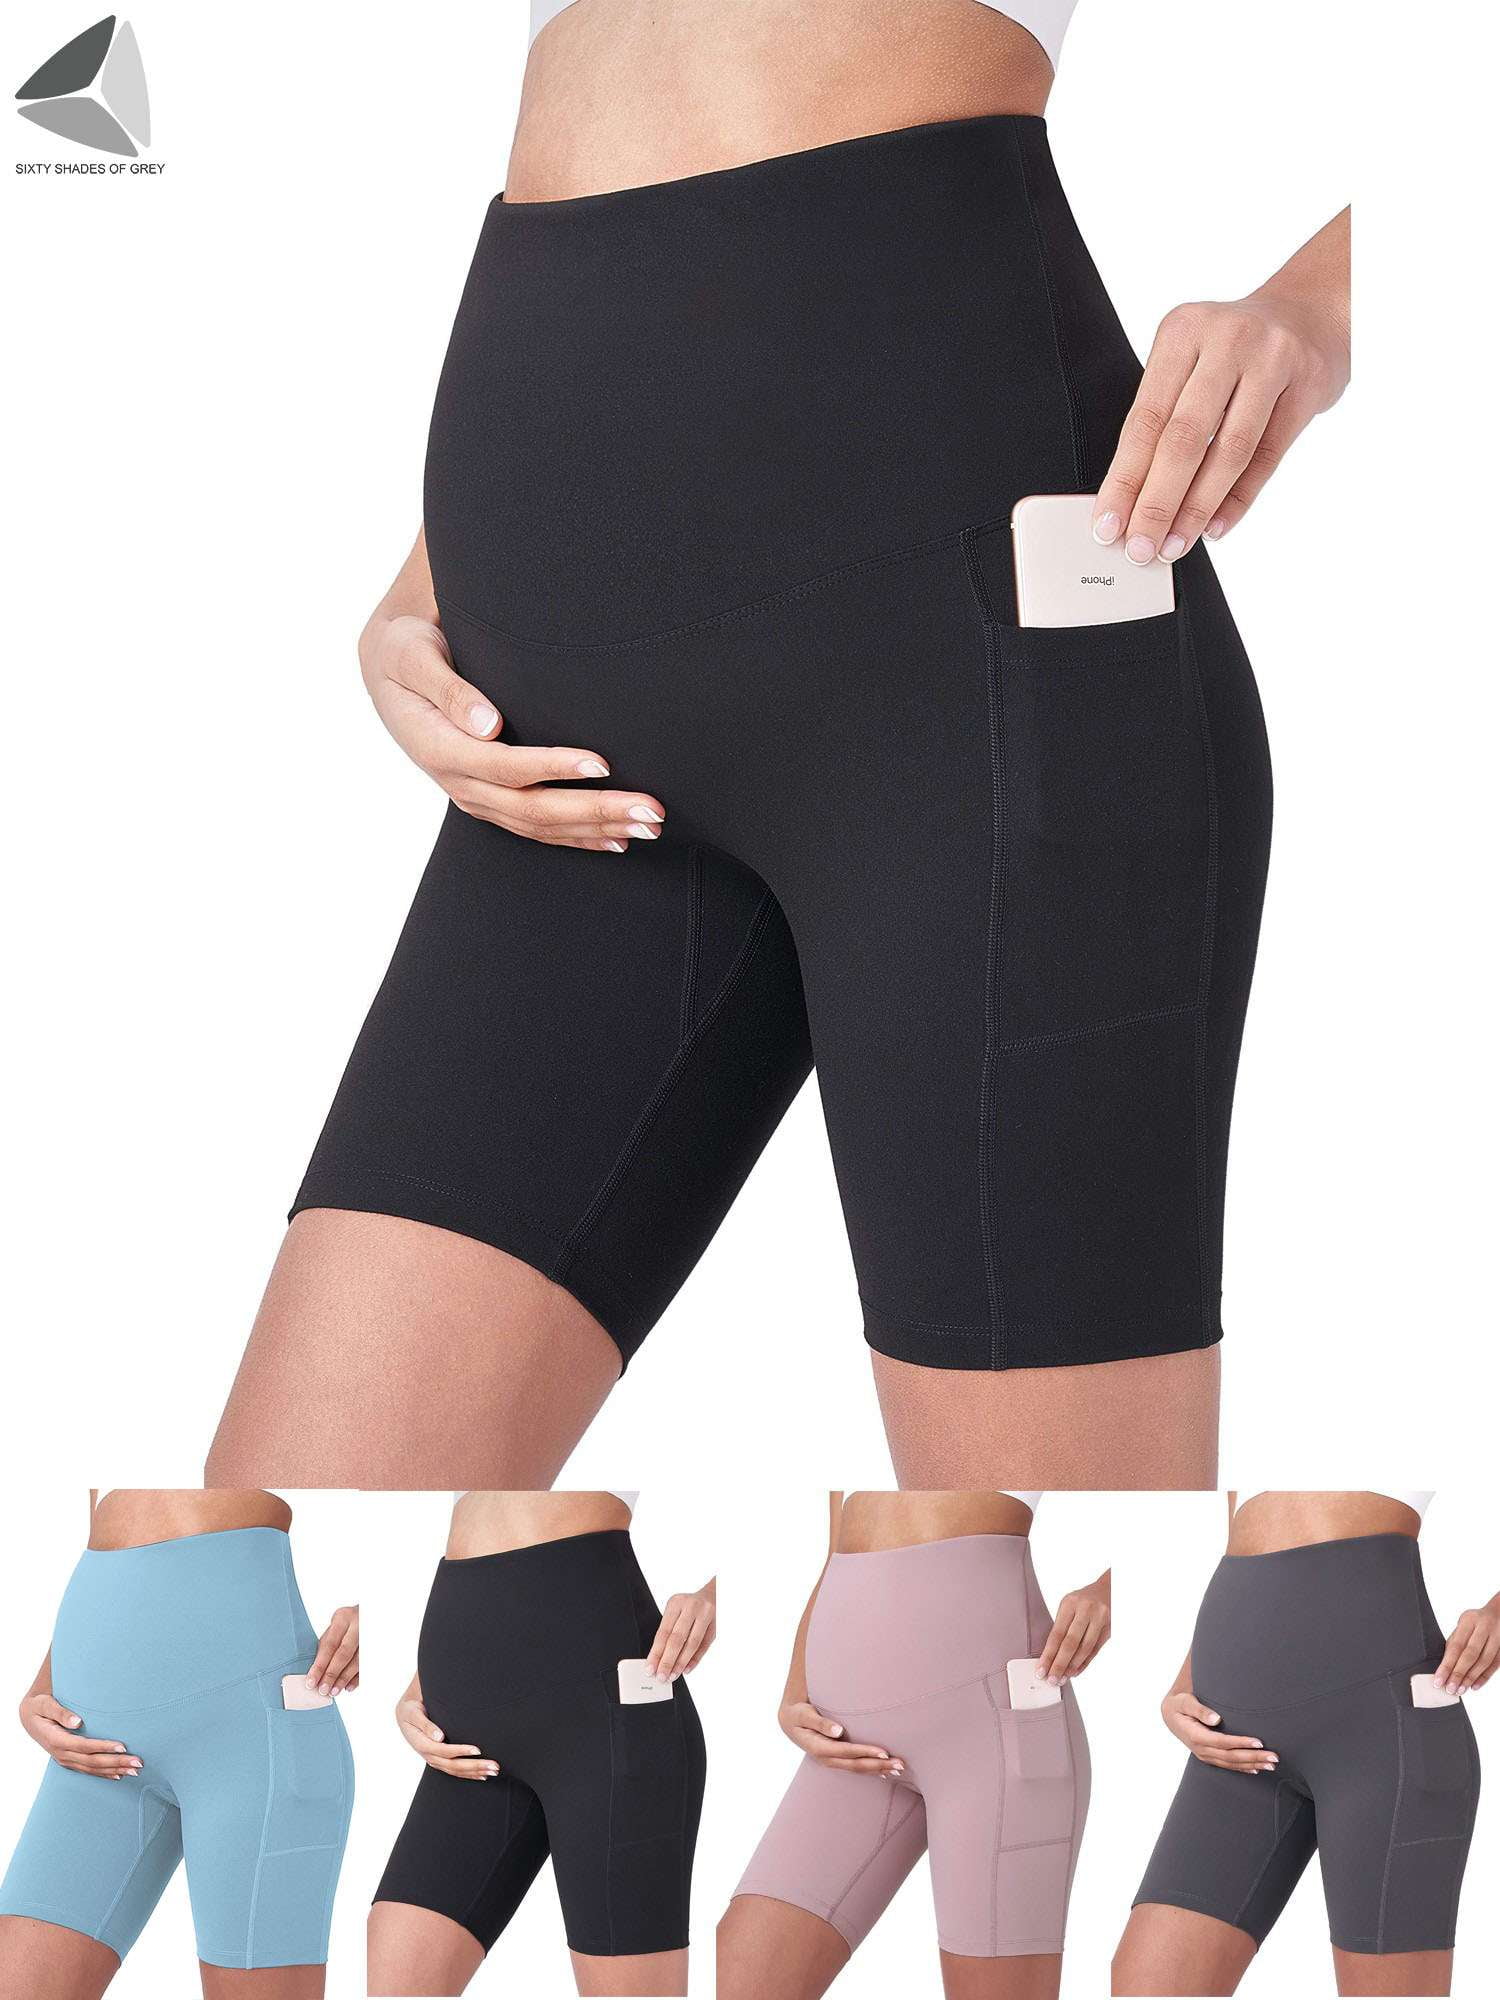 Women's Maternity Athletic Shorts Over The Belly Pregnancy Workout